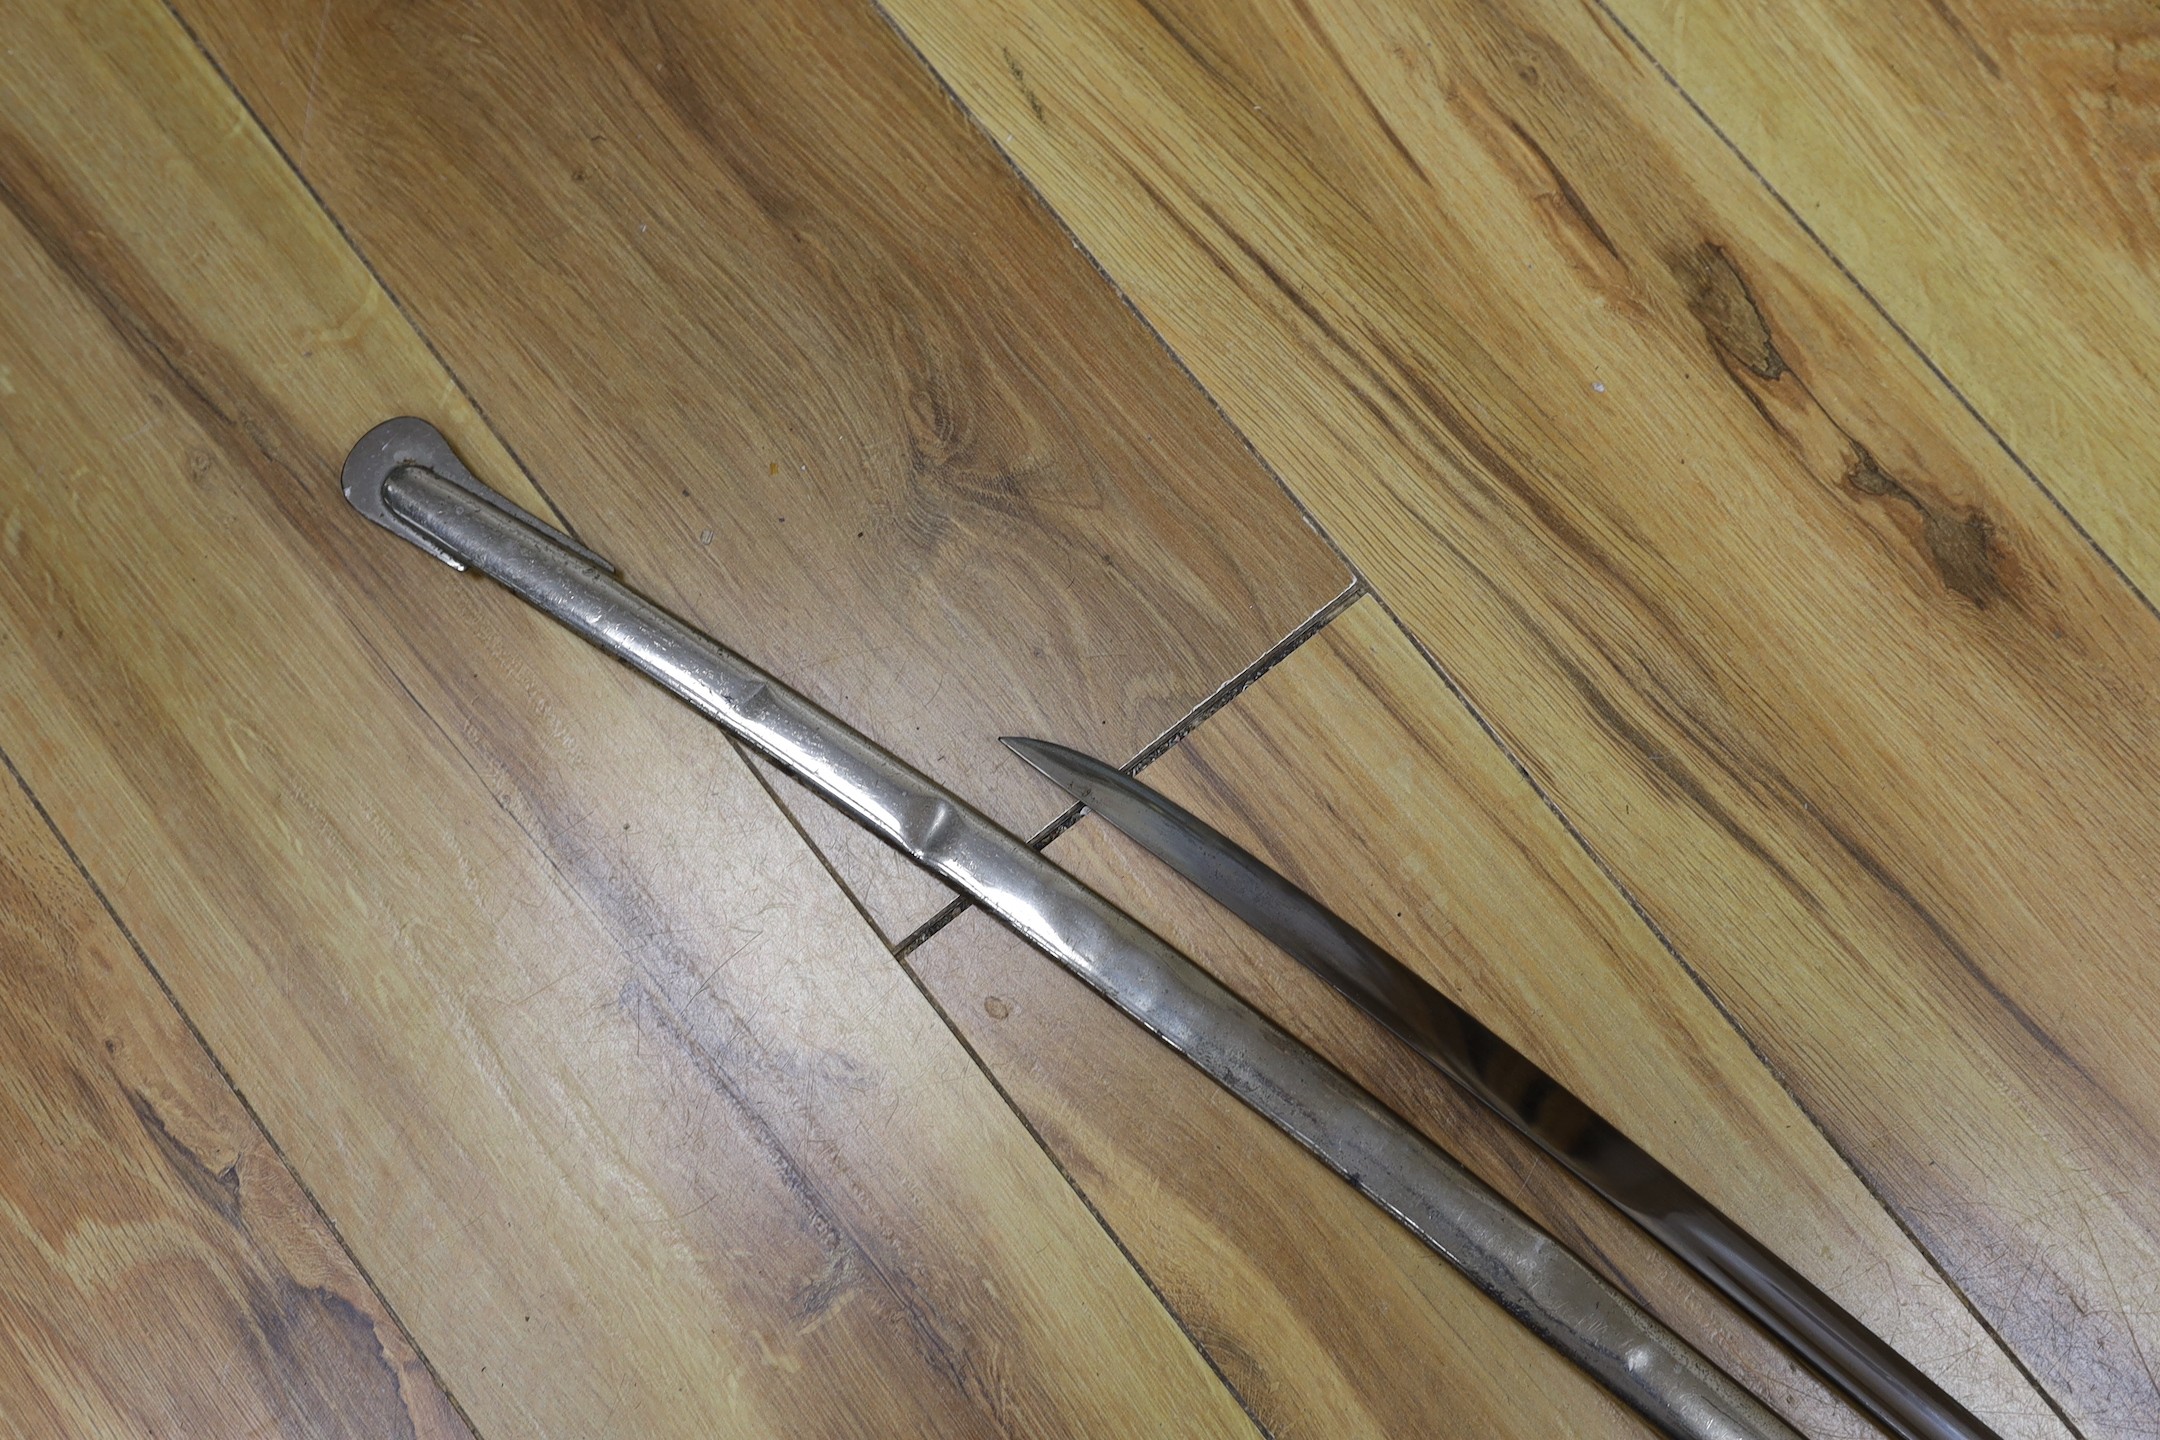 A United States Marines dress sword made by Wilkinson, the blade etched ‘S/SGT. JAMES P.S. DEVEREUX II. 1340836 U.S.M.C.’ with scabbard. Total length 107cm